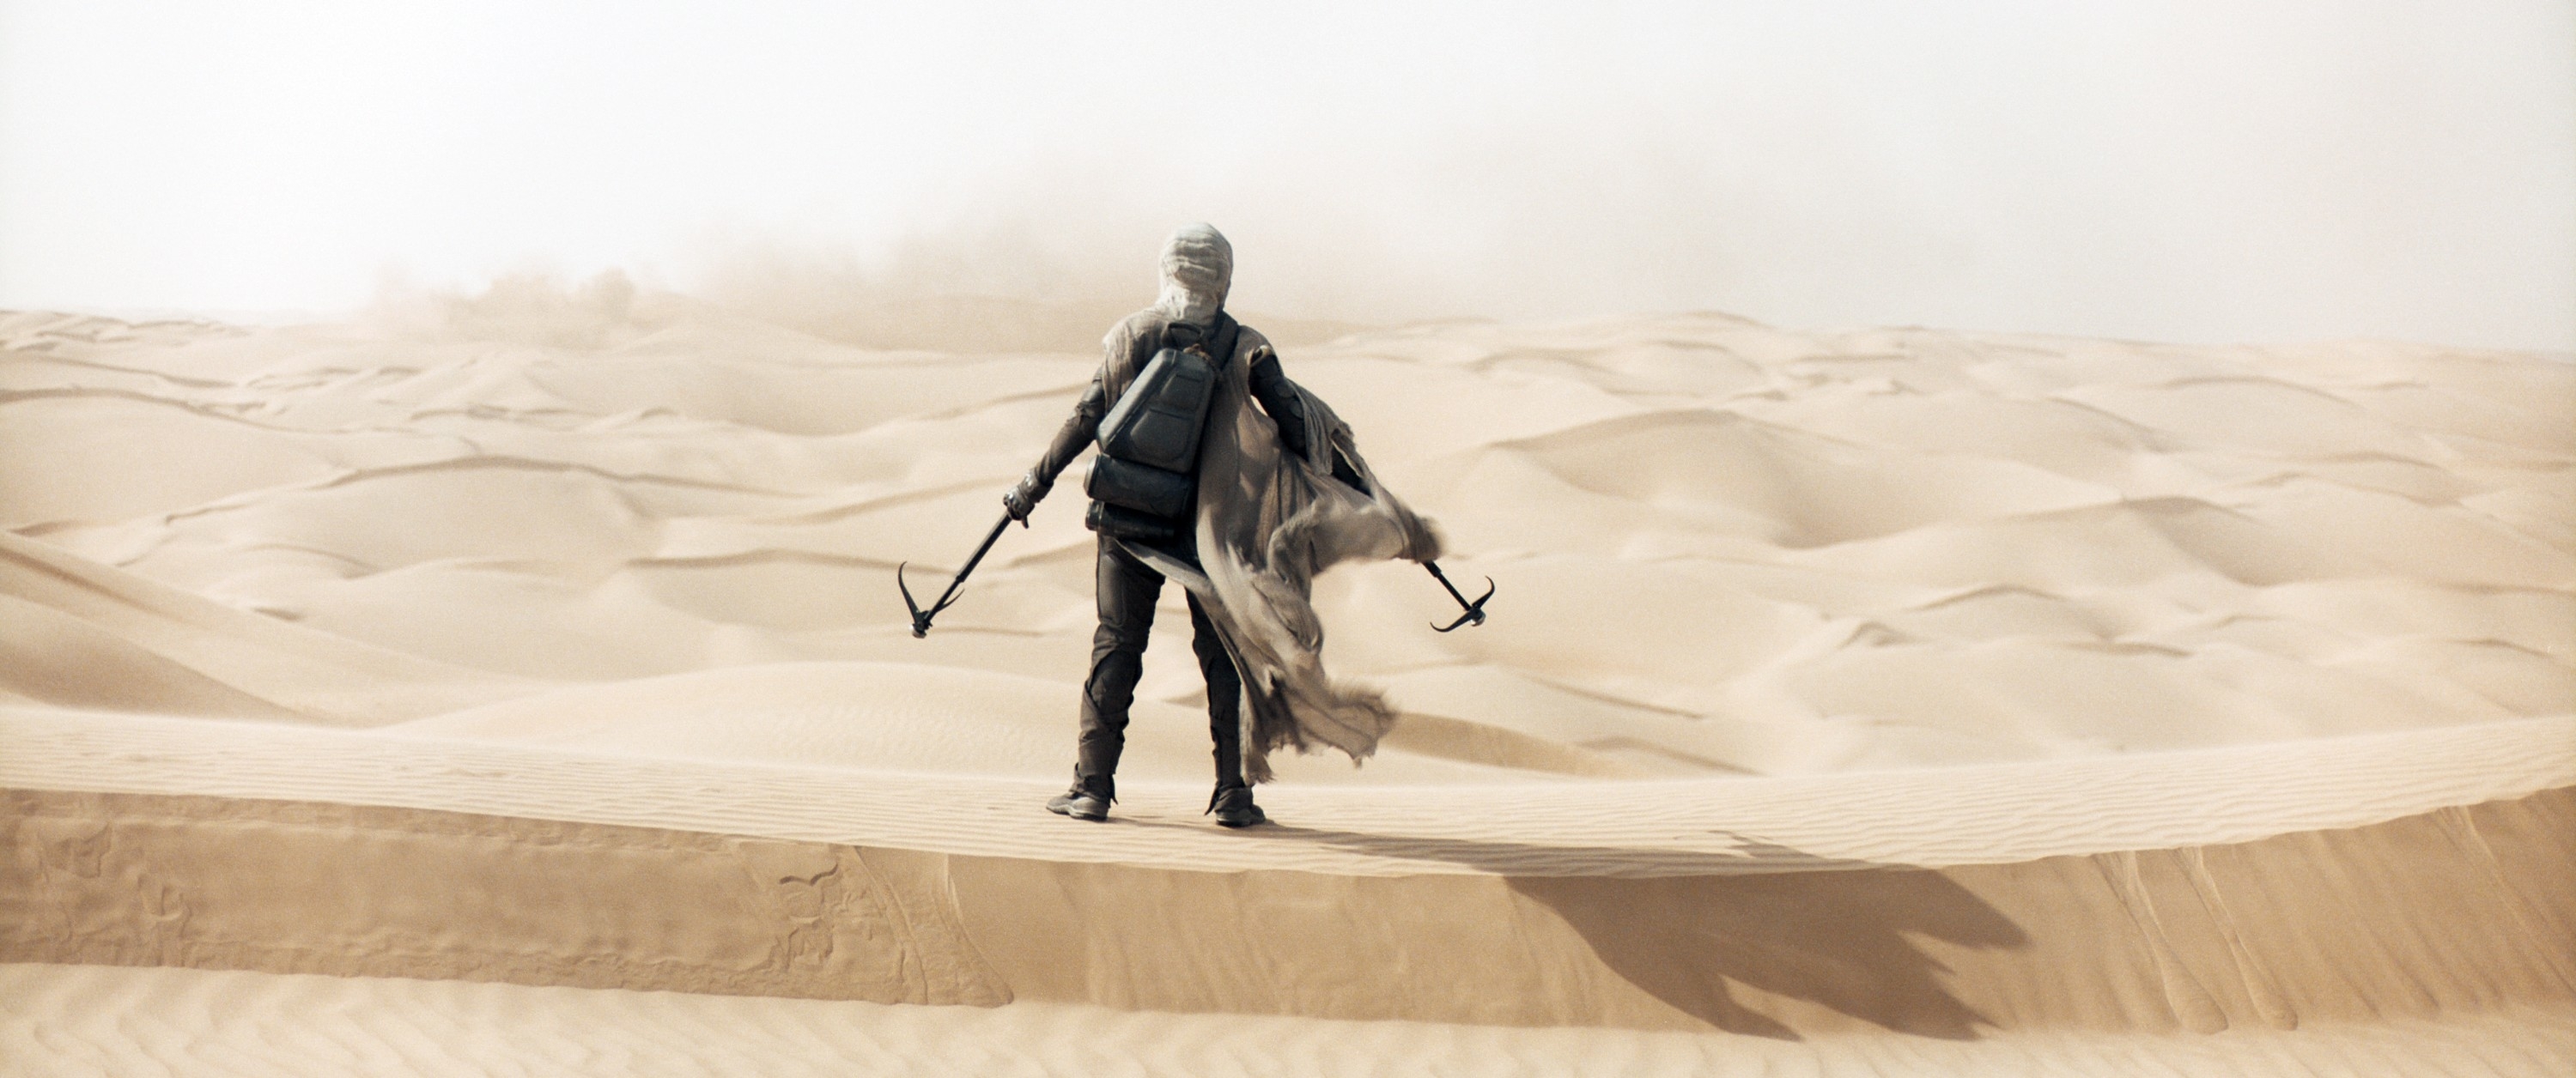 Character in futuristic armor stands atop a sand dune, holding weapons, in a desert landscape